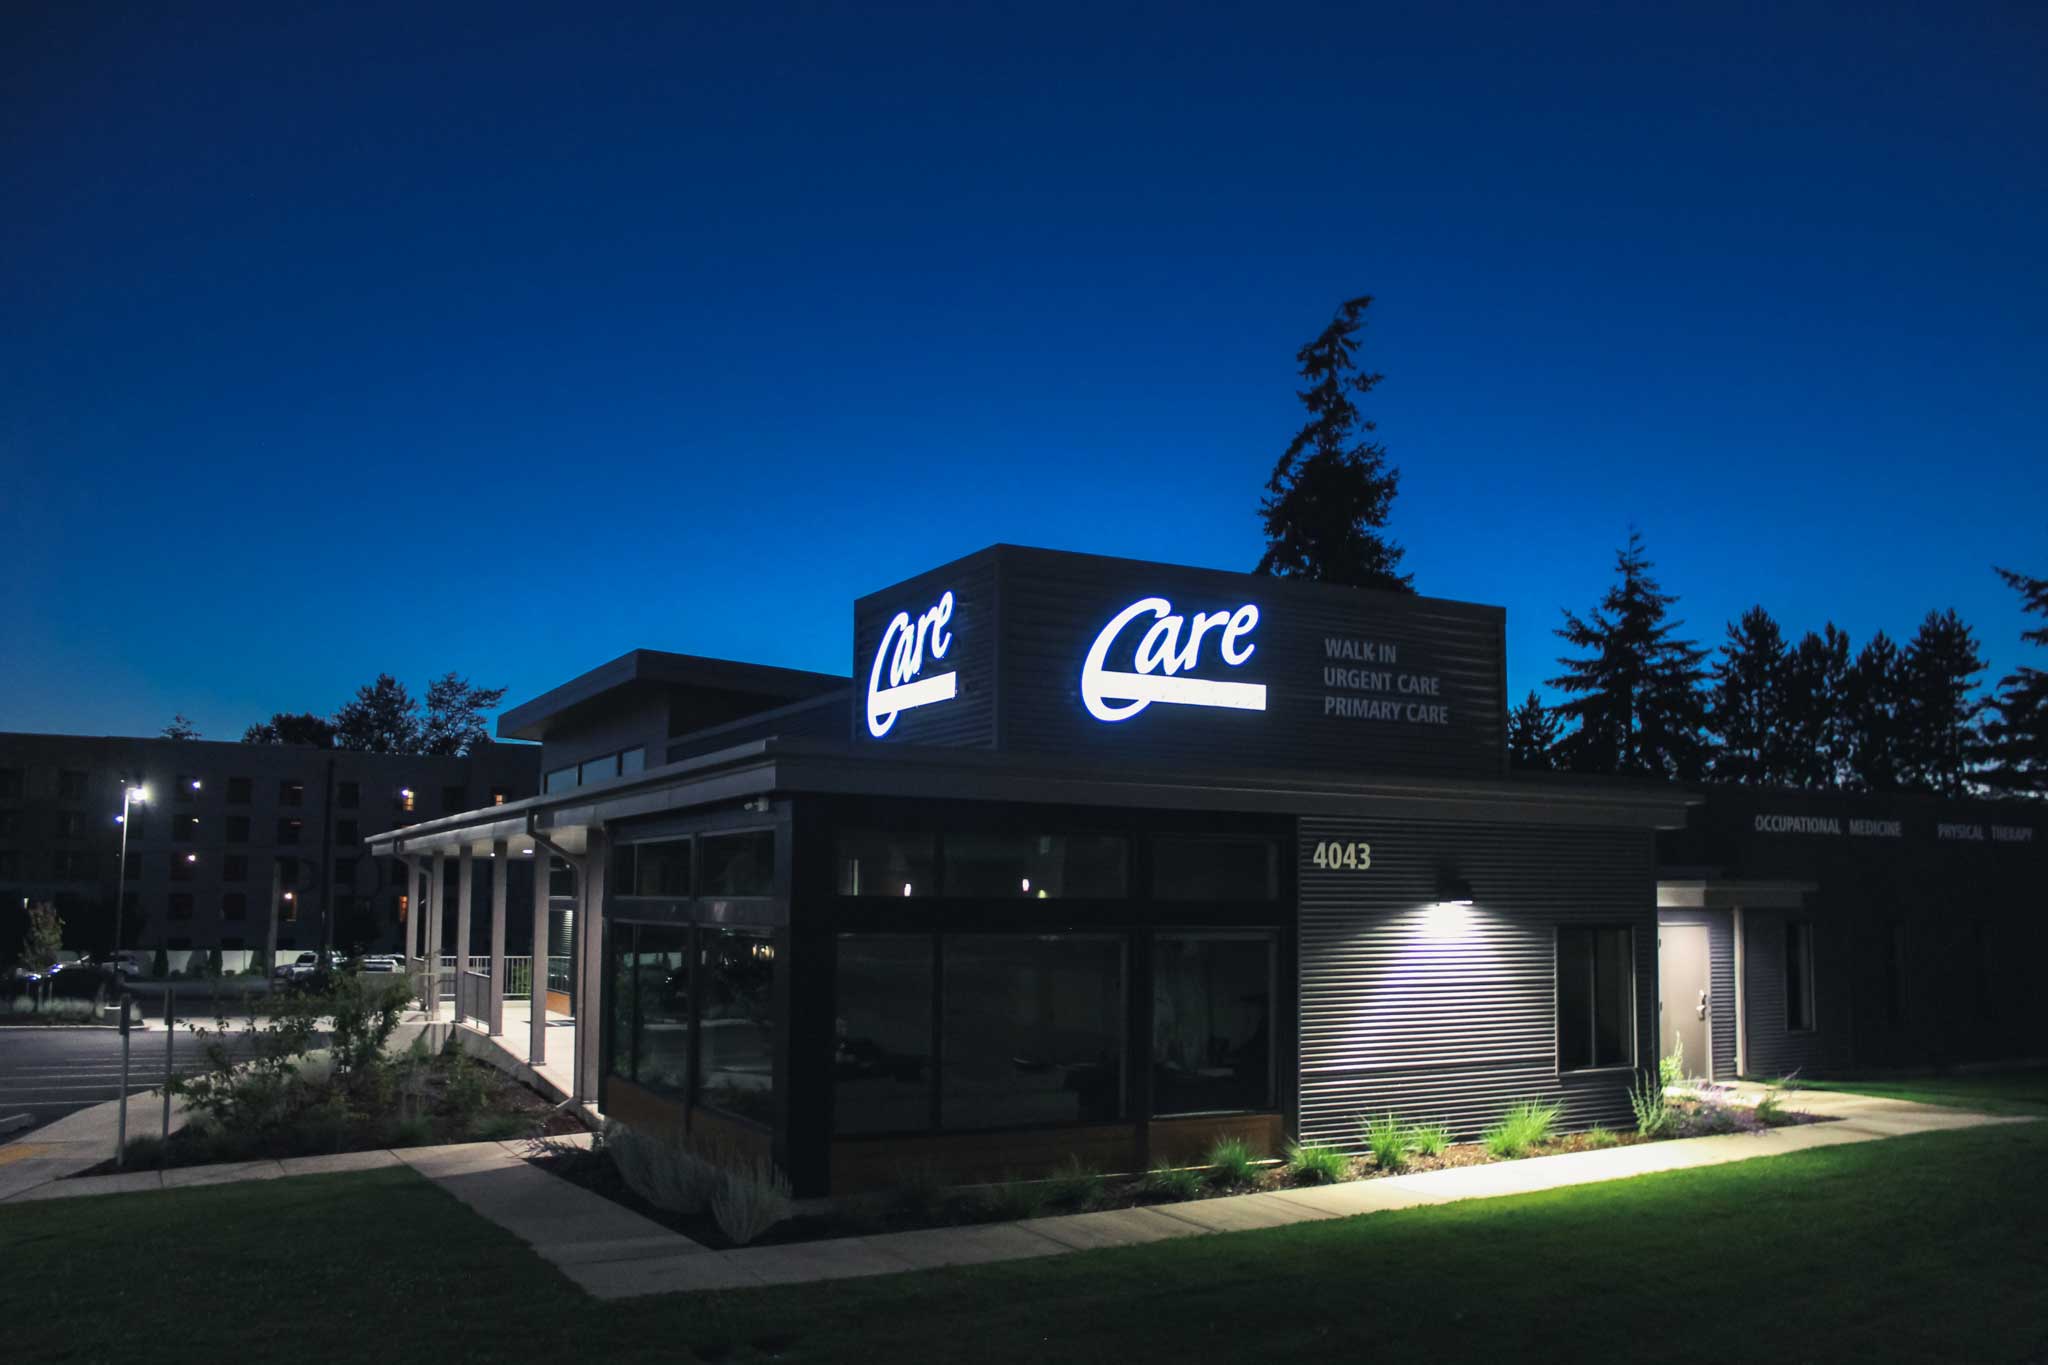 care-medical-group-illuminated-channel-letters-building-sign-night